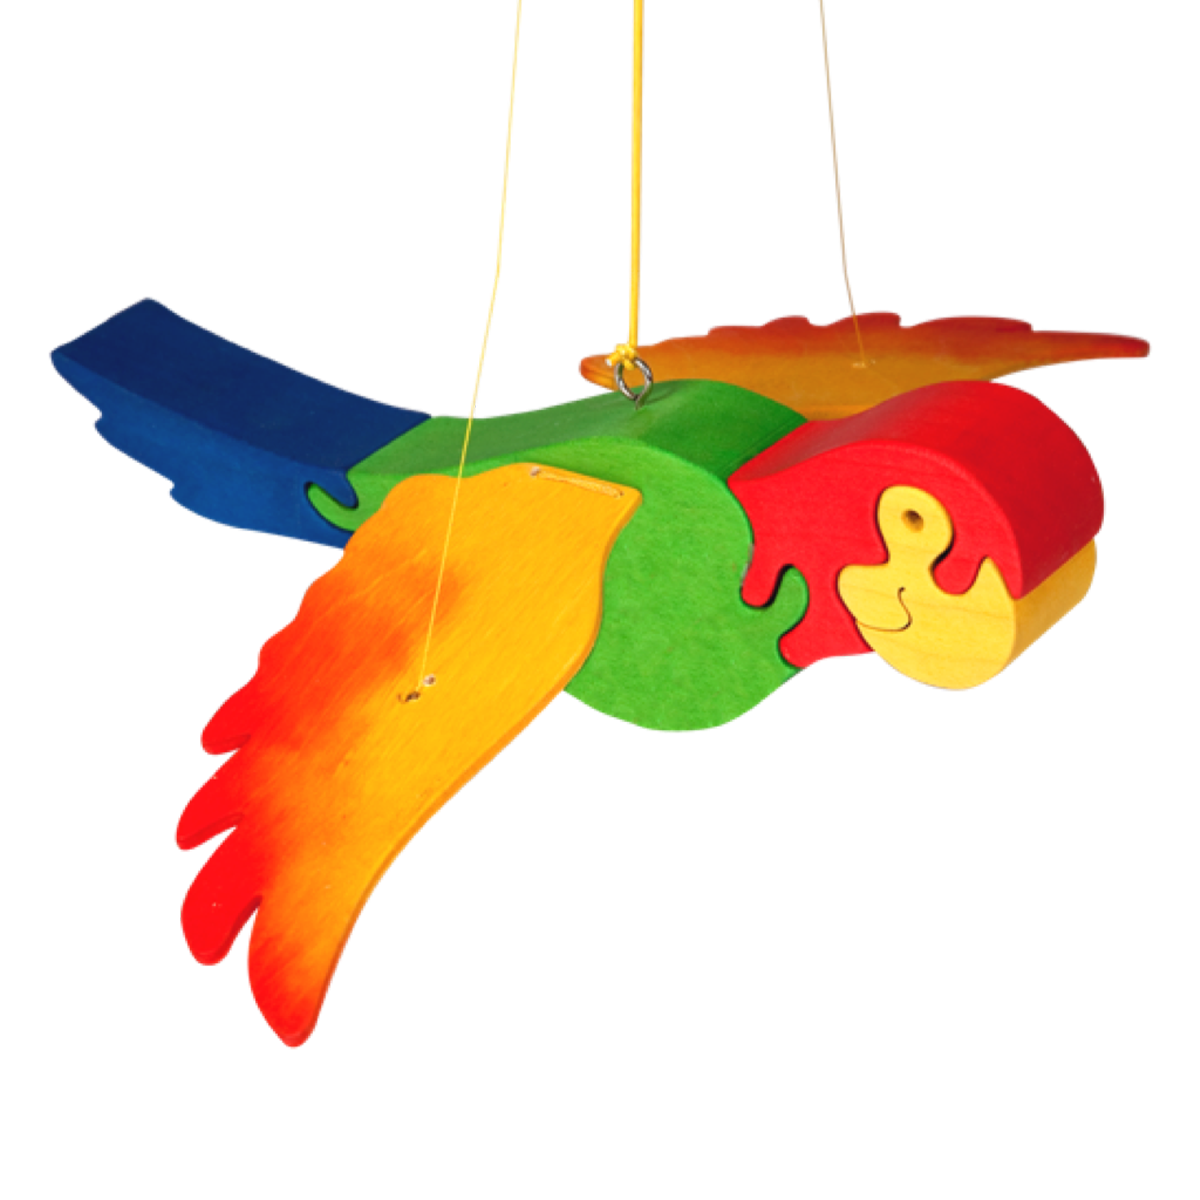 Colourful flying parrot toy to hang on top of a crib for babies